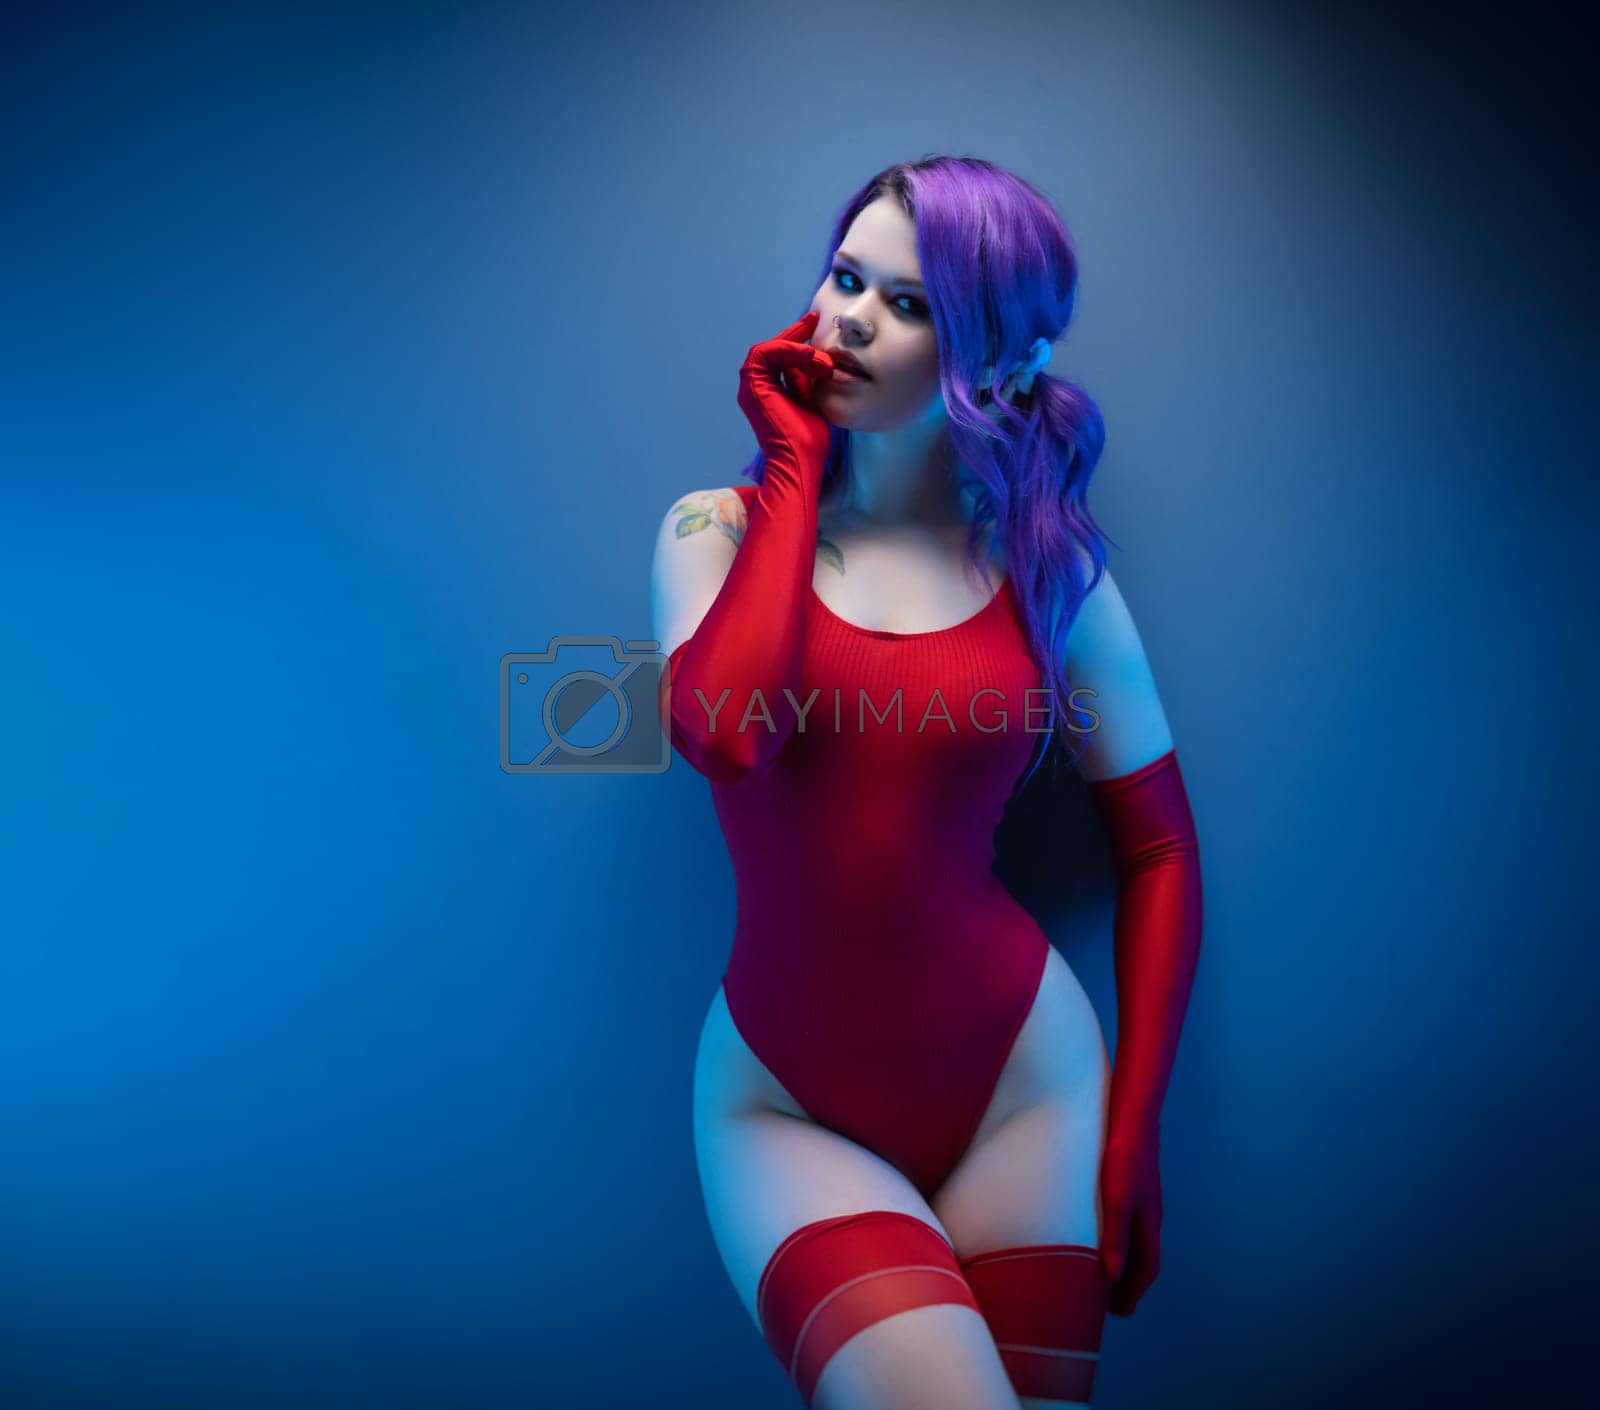 Royalty free image of sexy girl in red bodysuit stockings and red gloves poses erotically against the background by Rotozey